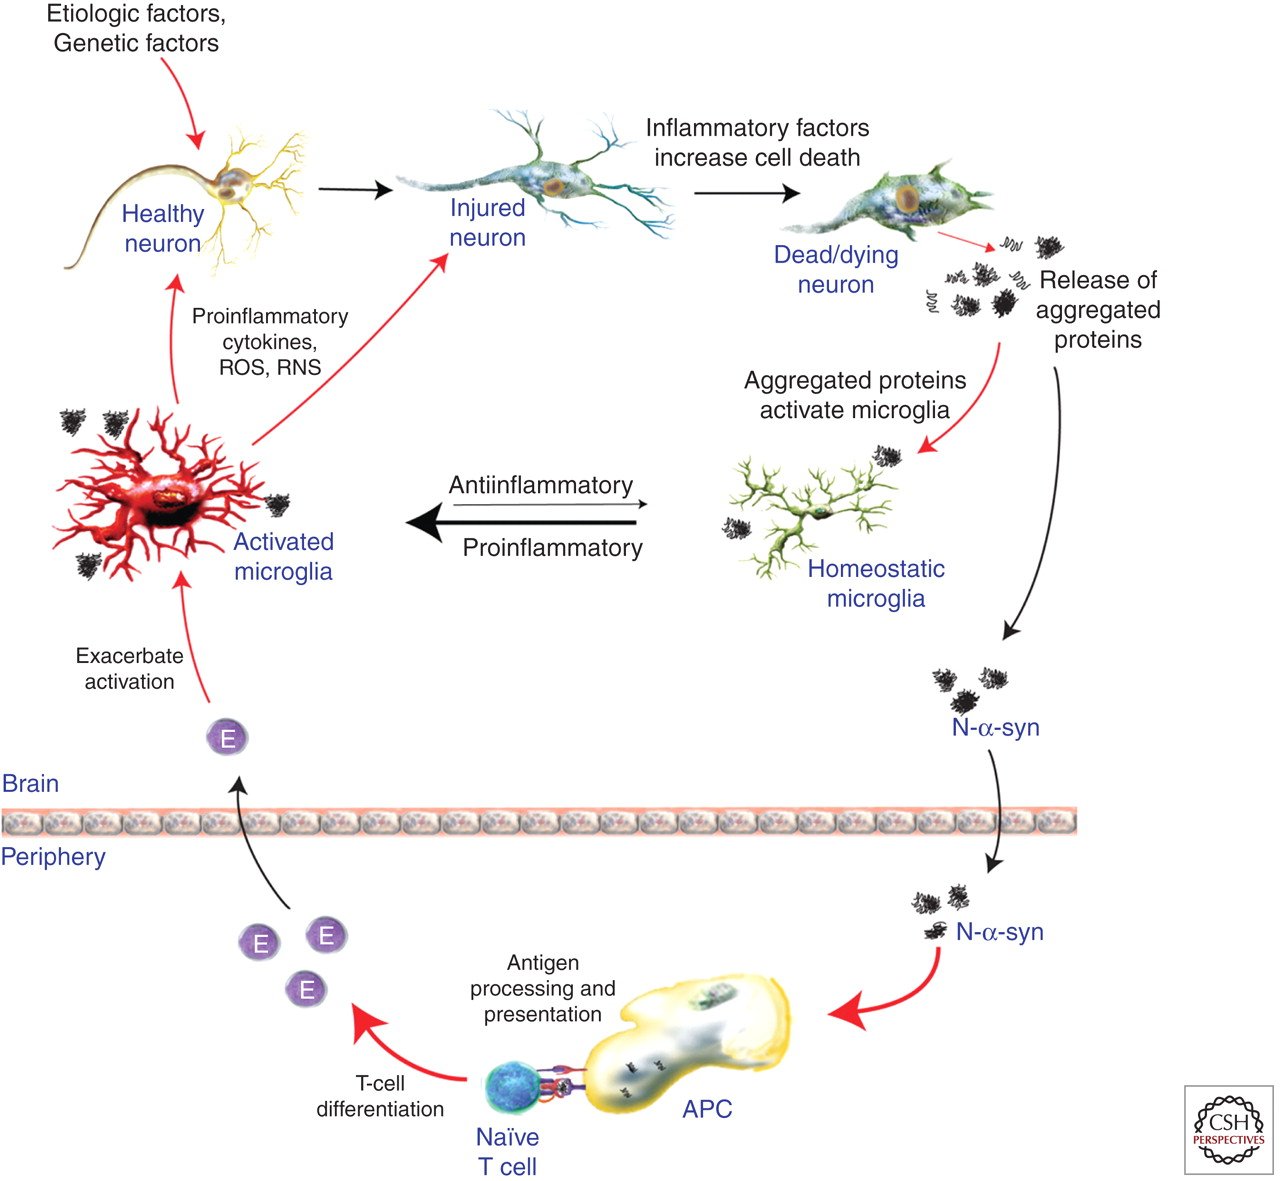 Inflammation and Adaptive Immunity in Parkinsonâ€™s Disease